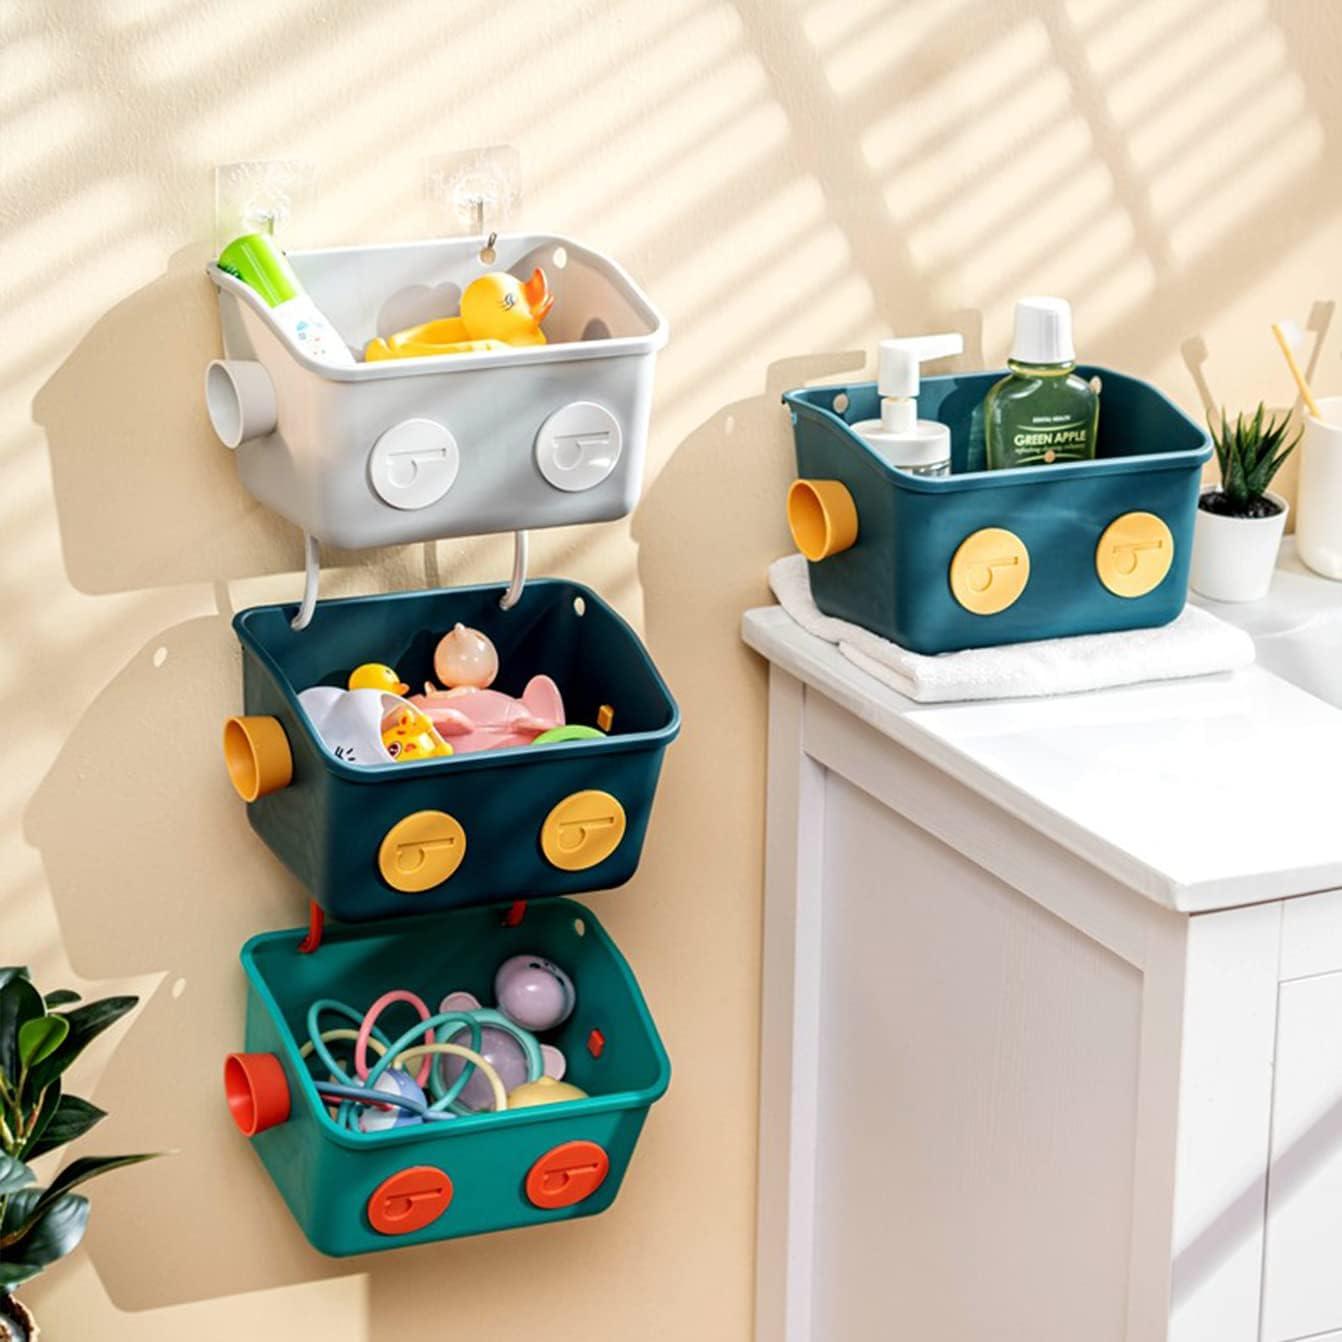 A group of plastic bins with toys and other objects on the wall

Description automatically generated